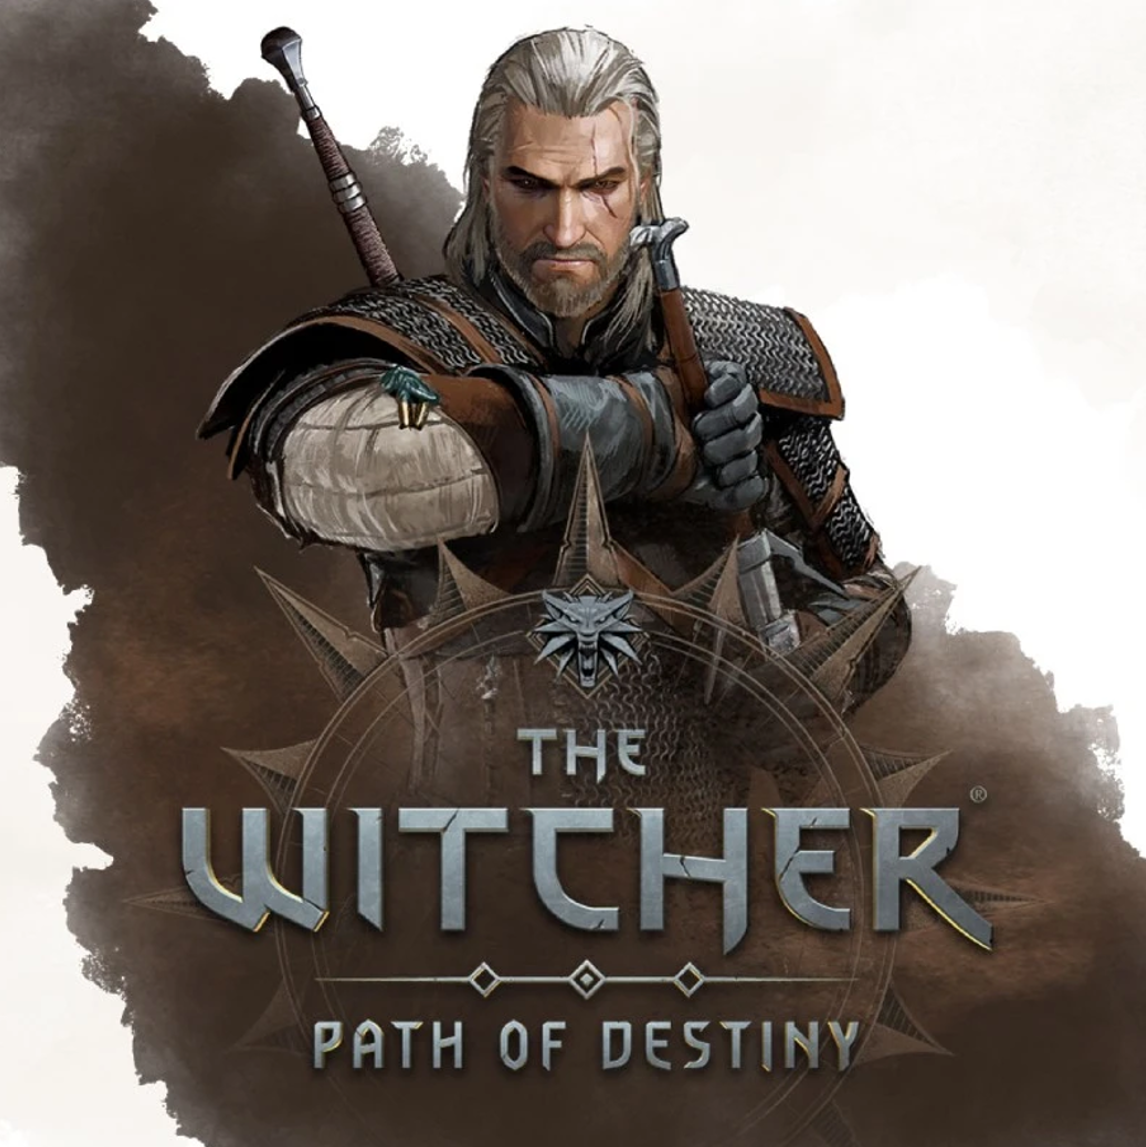 Gamefound Exclusive The Witcher: Path of Destiny Board Game Logo